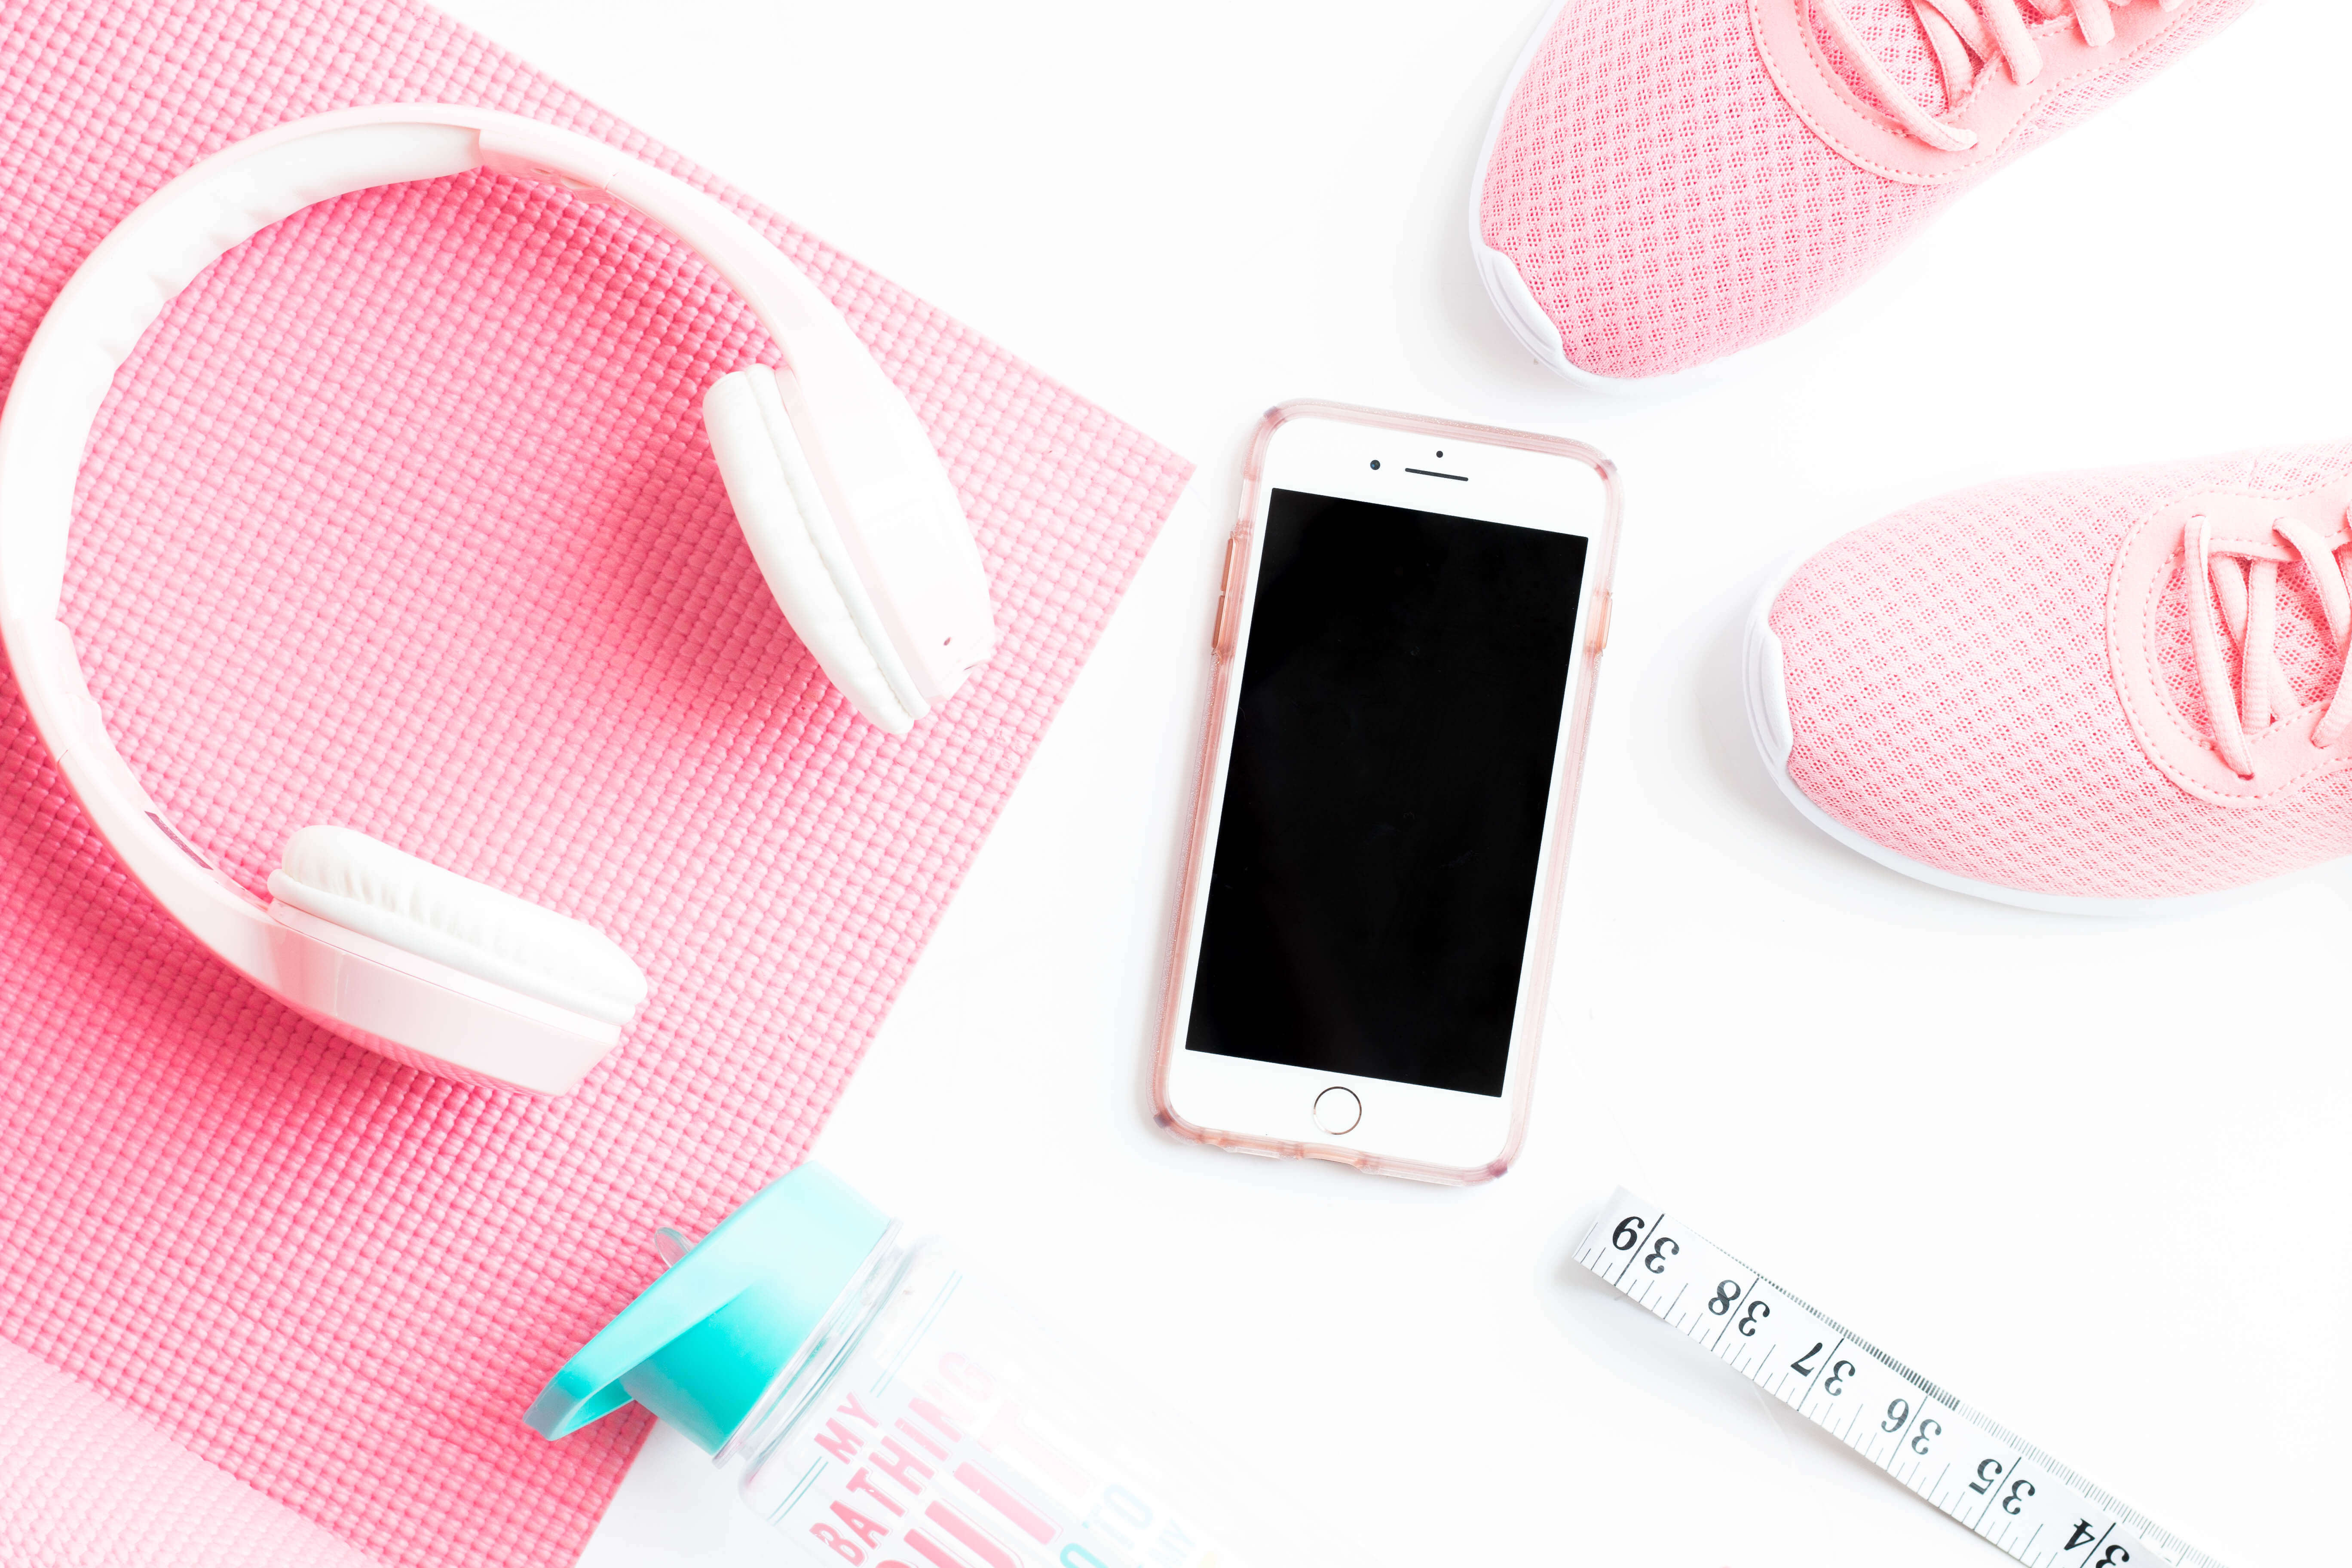 Flat lay with headphones, yoga mat, water bottle, iphone, shoes, measuring tape. Luara from Mom Connection helps help moms lose weight and talking about why moms have a hard time losing weight.